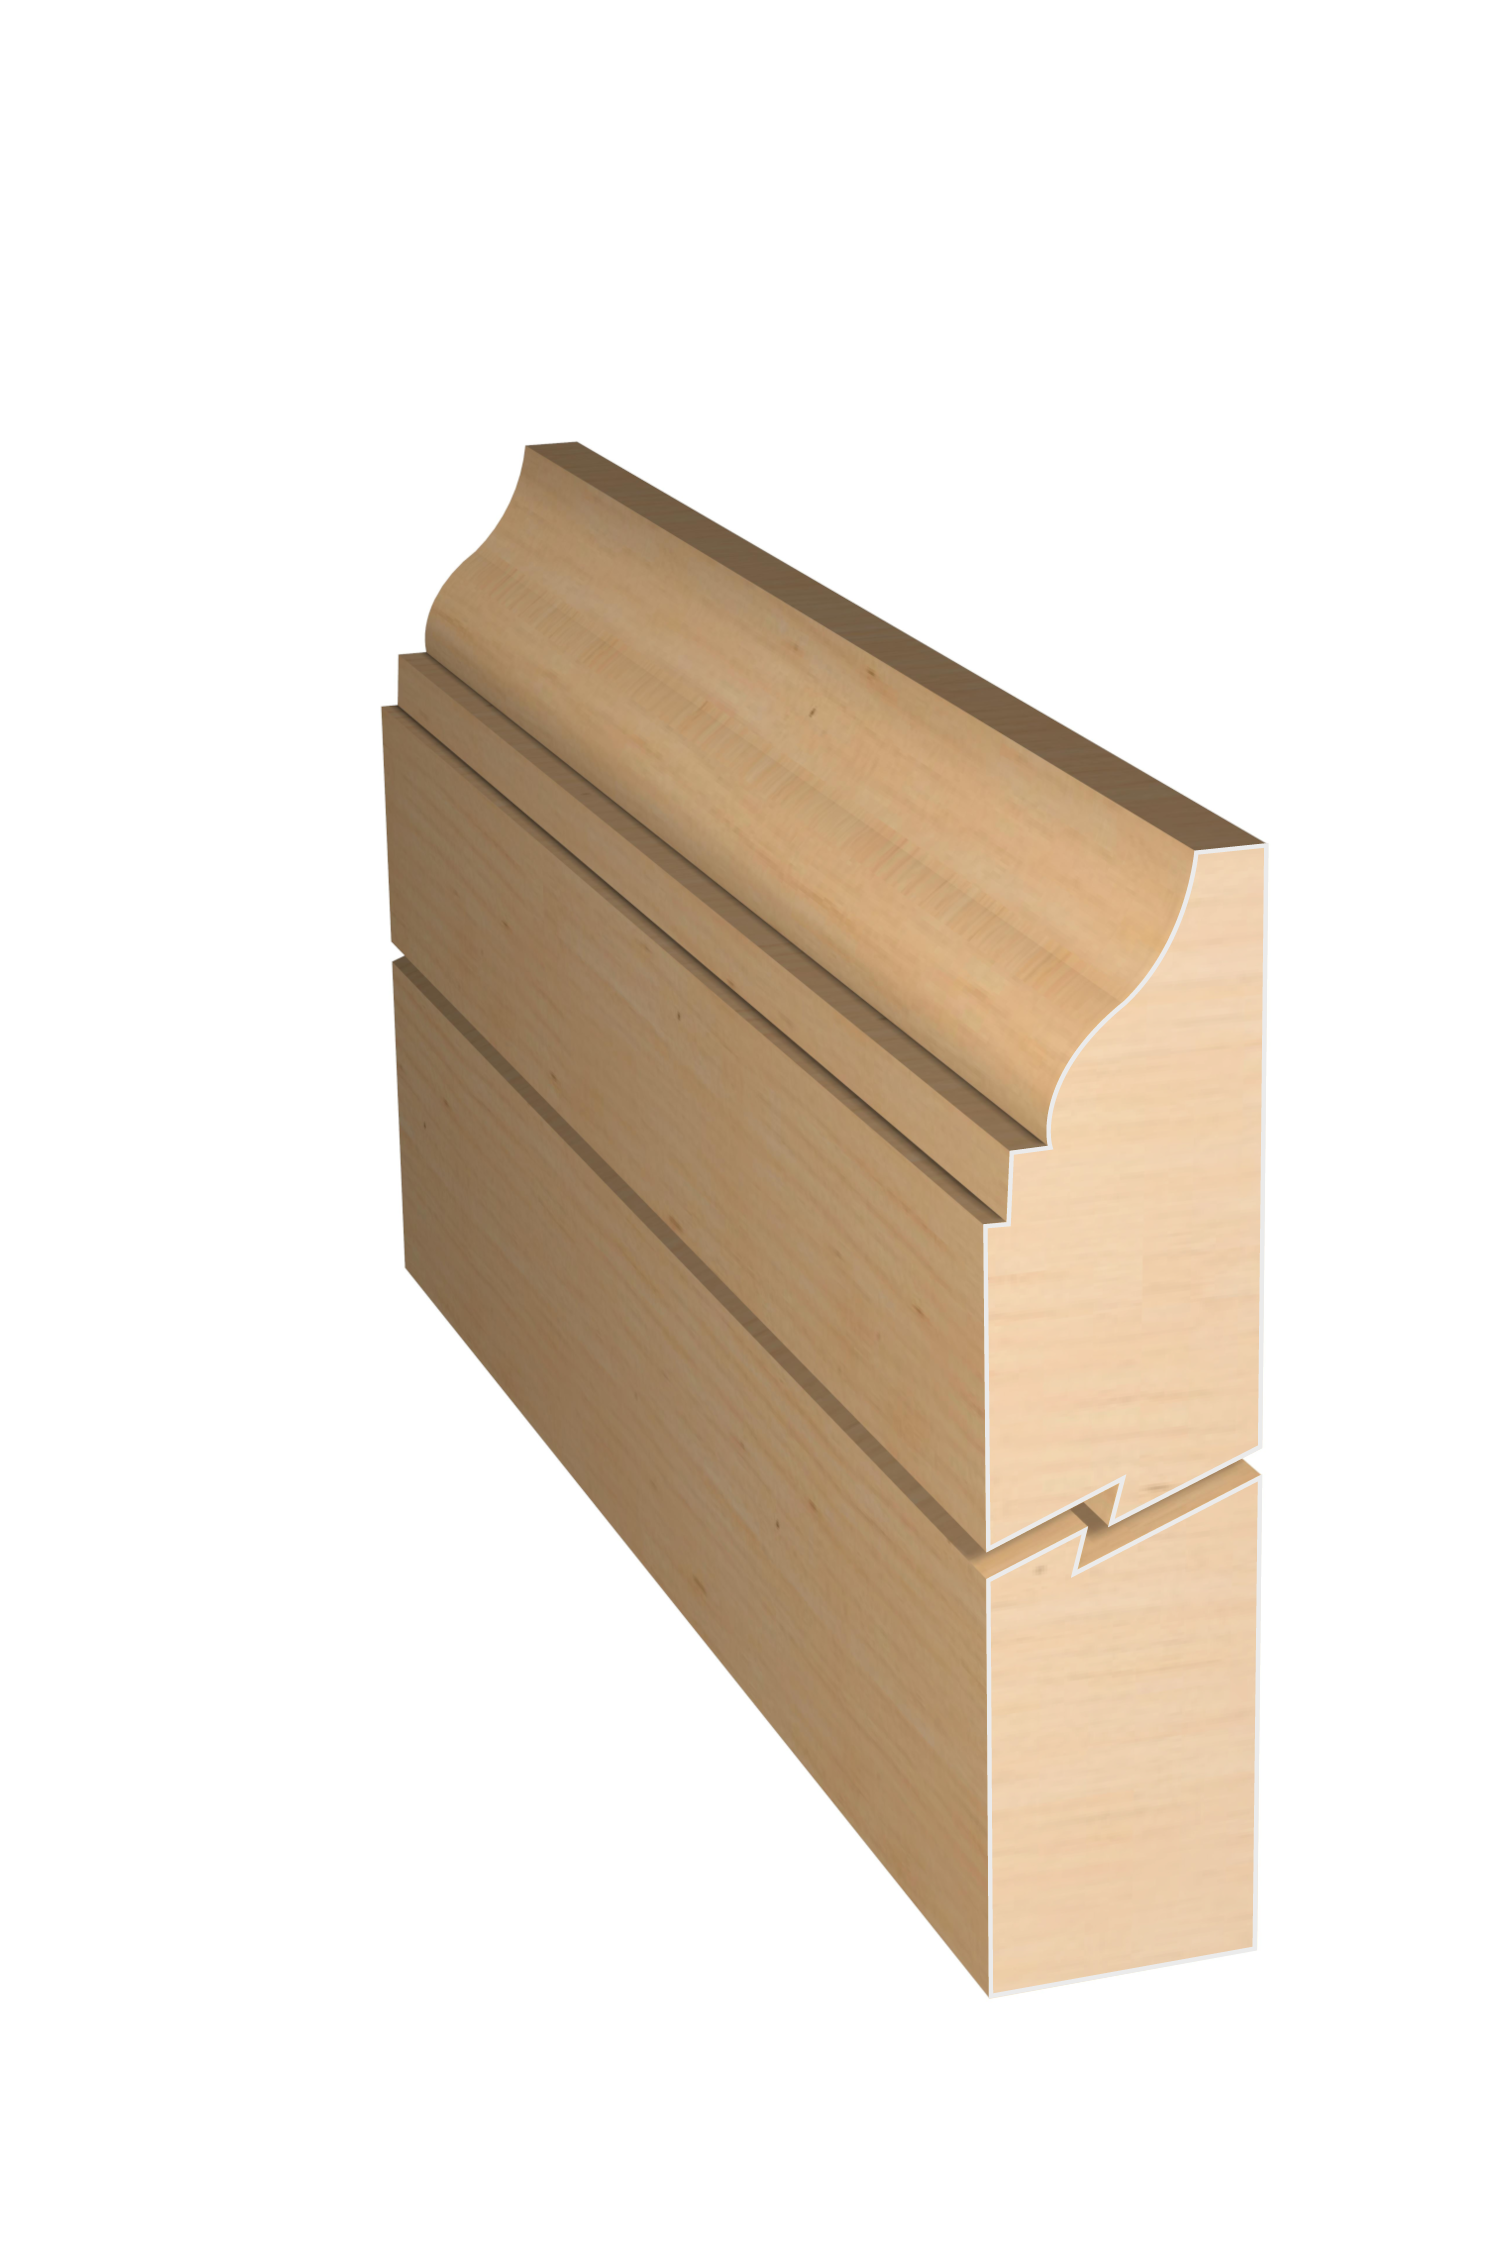 Three dimensional rendering of custom edge profile wood molding SKPL9 made by Public Lumber Company in Detroit.